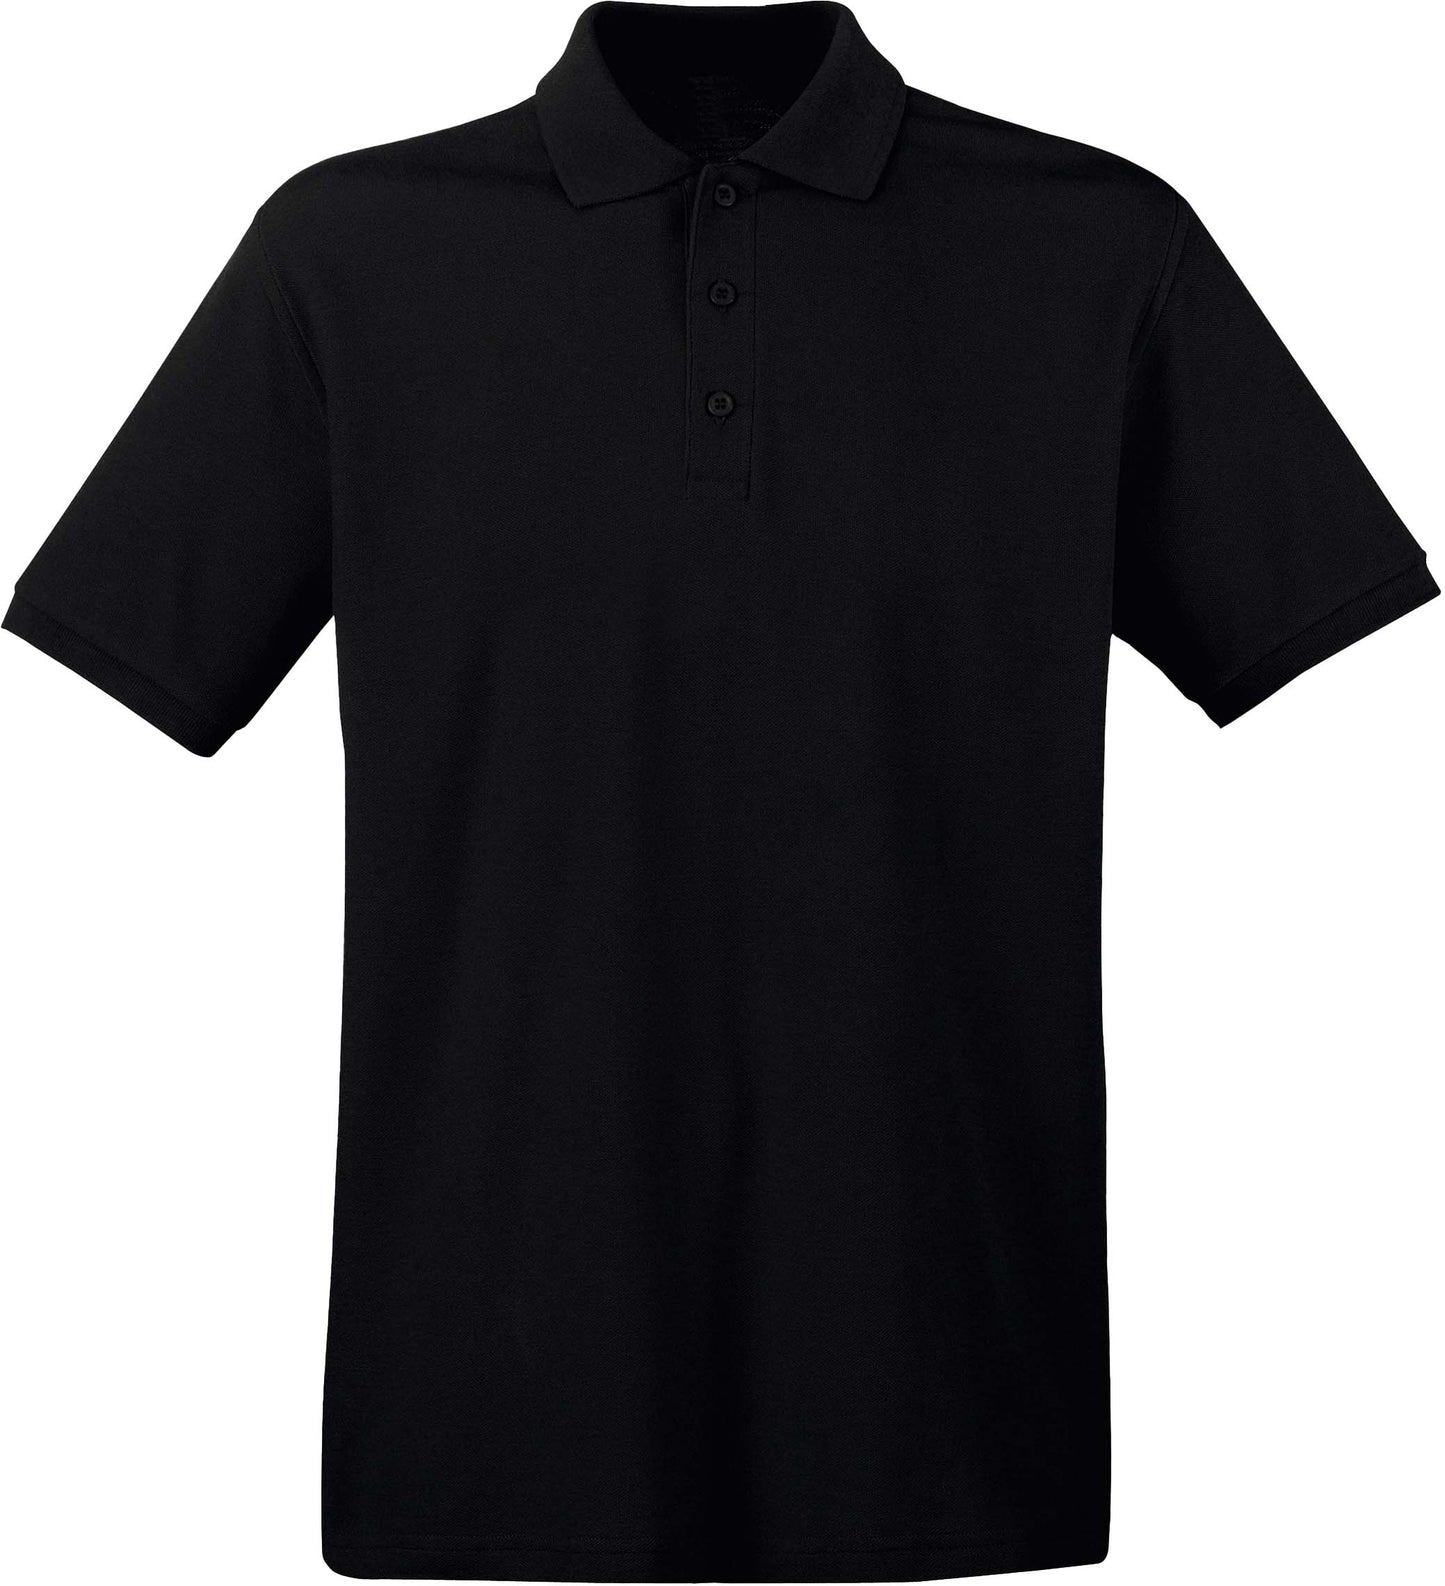 Workwear Text Polo Unisex T-shirt Save £3 per item when ordering 5 or more!